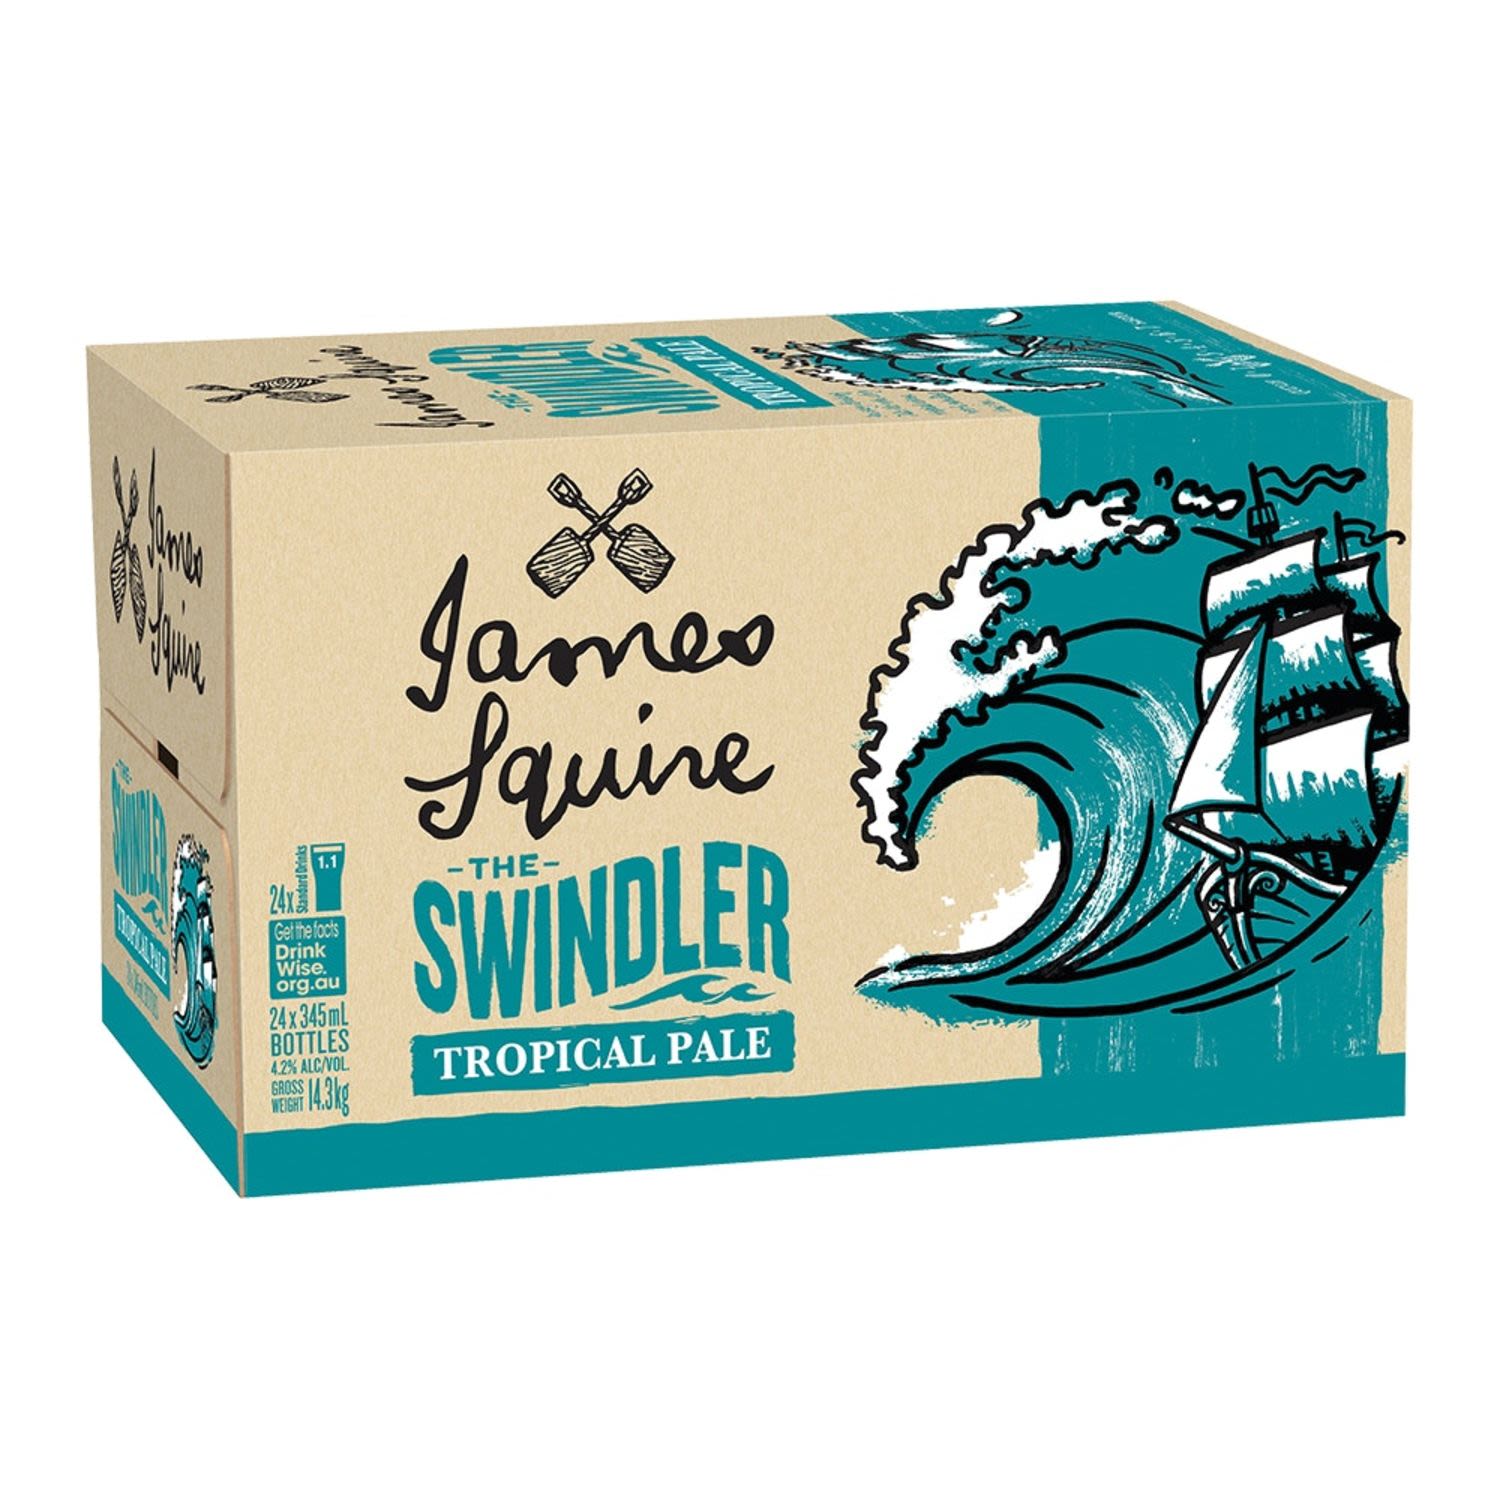 James Squire The Swindler Tropical Pale Ale Bottle 345mL 24 Pack